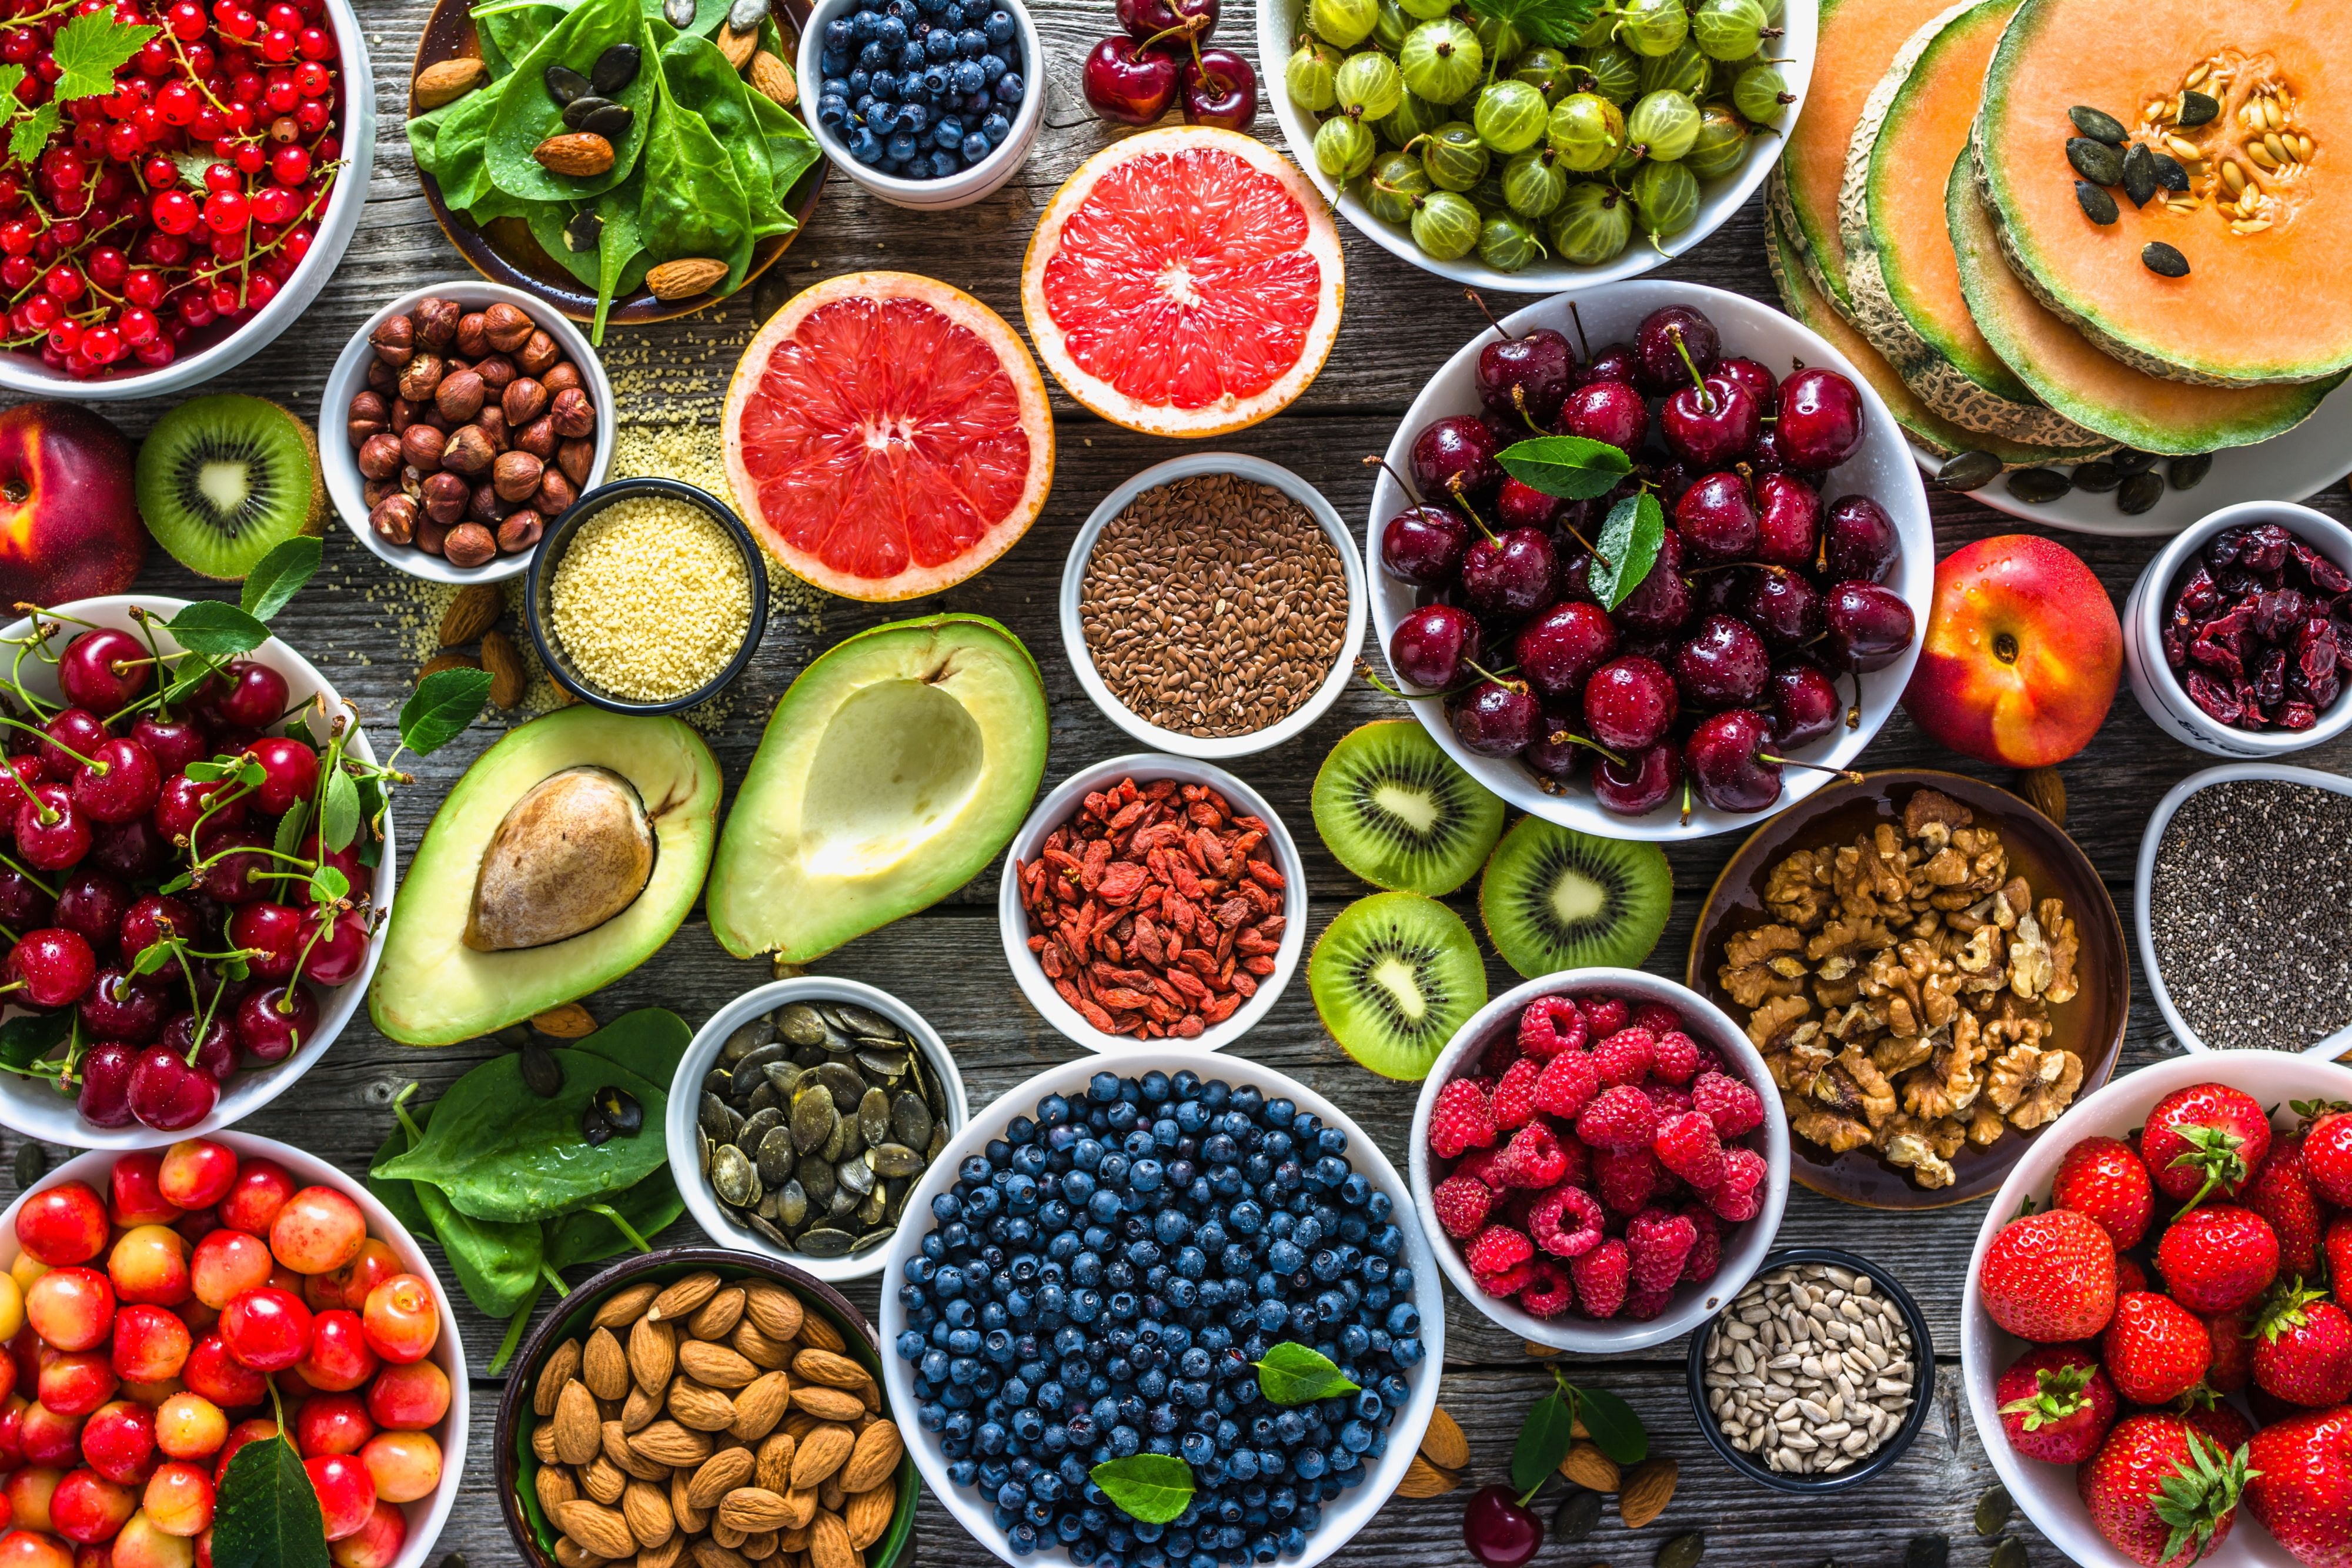 A selection of healthy superfoods like fruits, vegetables, nuts, and seeds, including avocado, cherries, goji berries, and blueberries